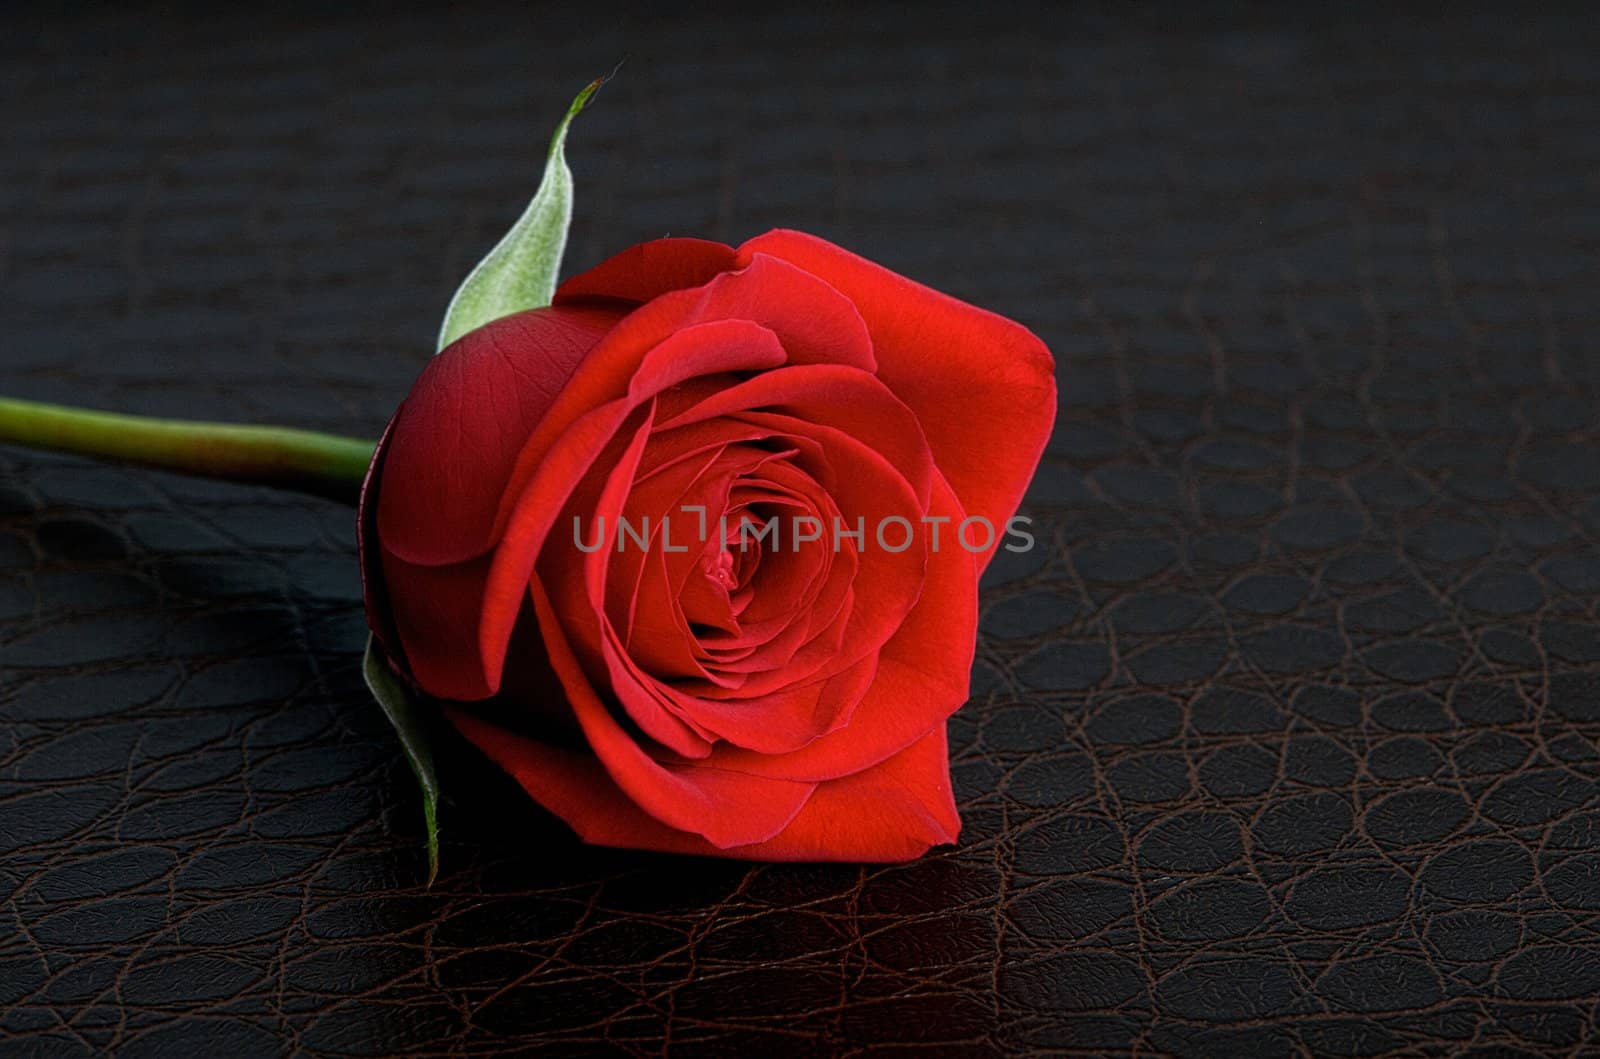 Red rose on a dark brown textured leather background